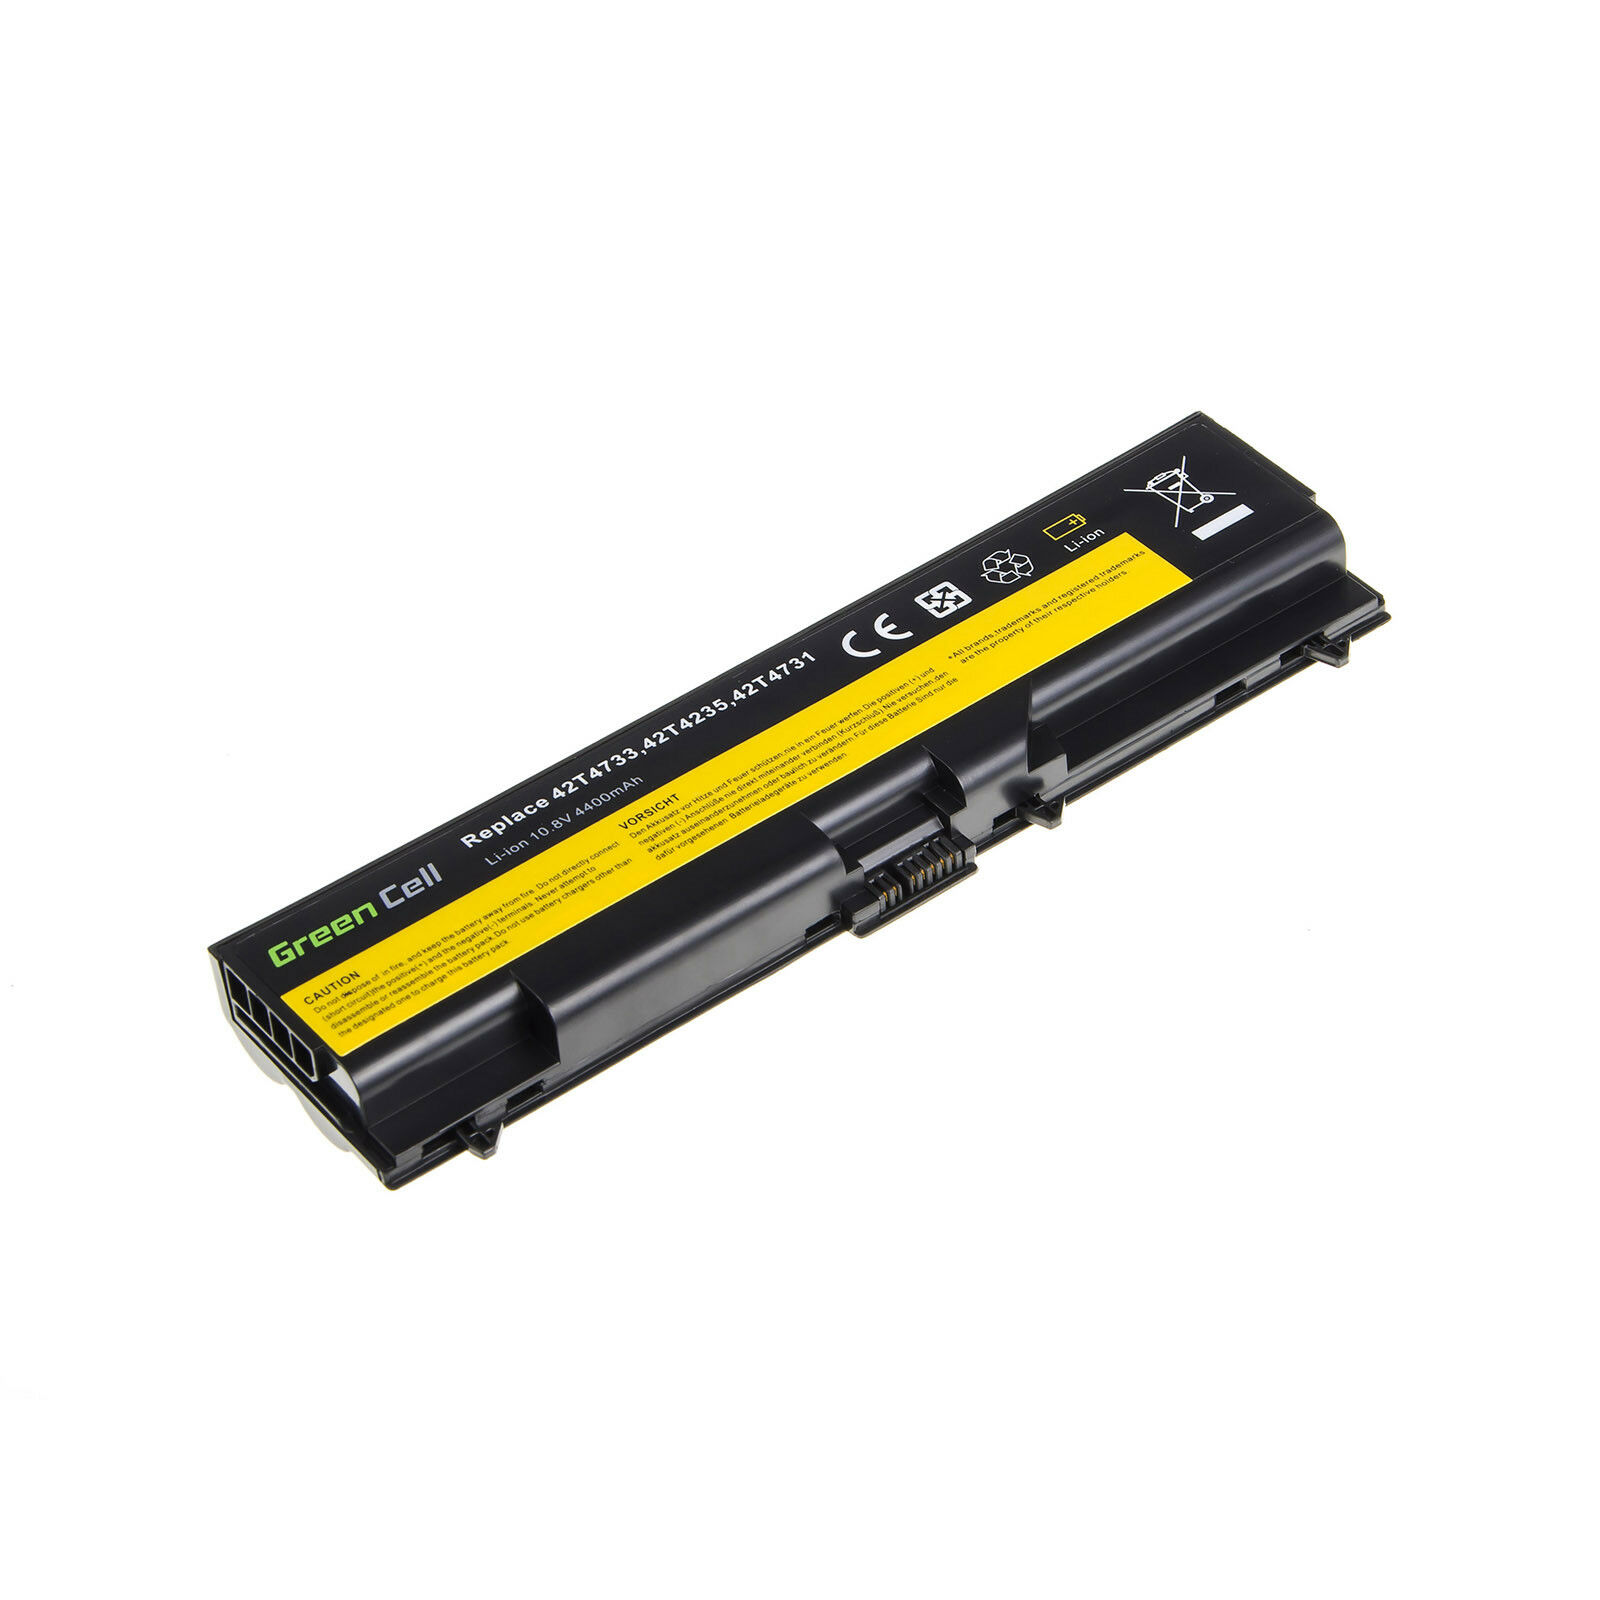 Lenovo 0A36302 42T4757 0A36303 45N1001 45N1000 45N1011 compatible battery